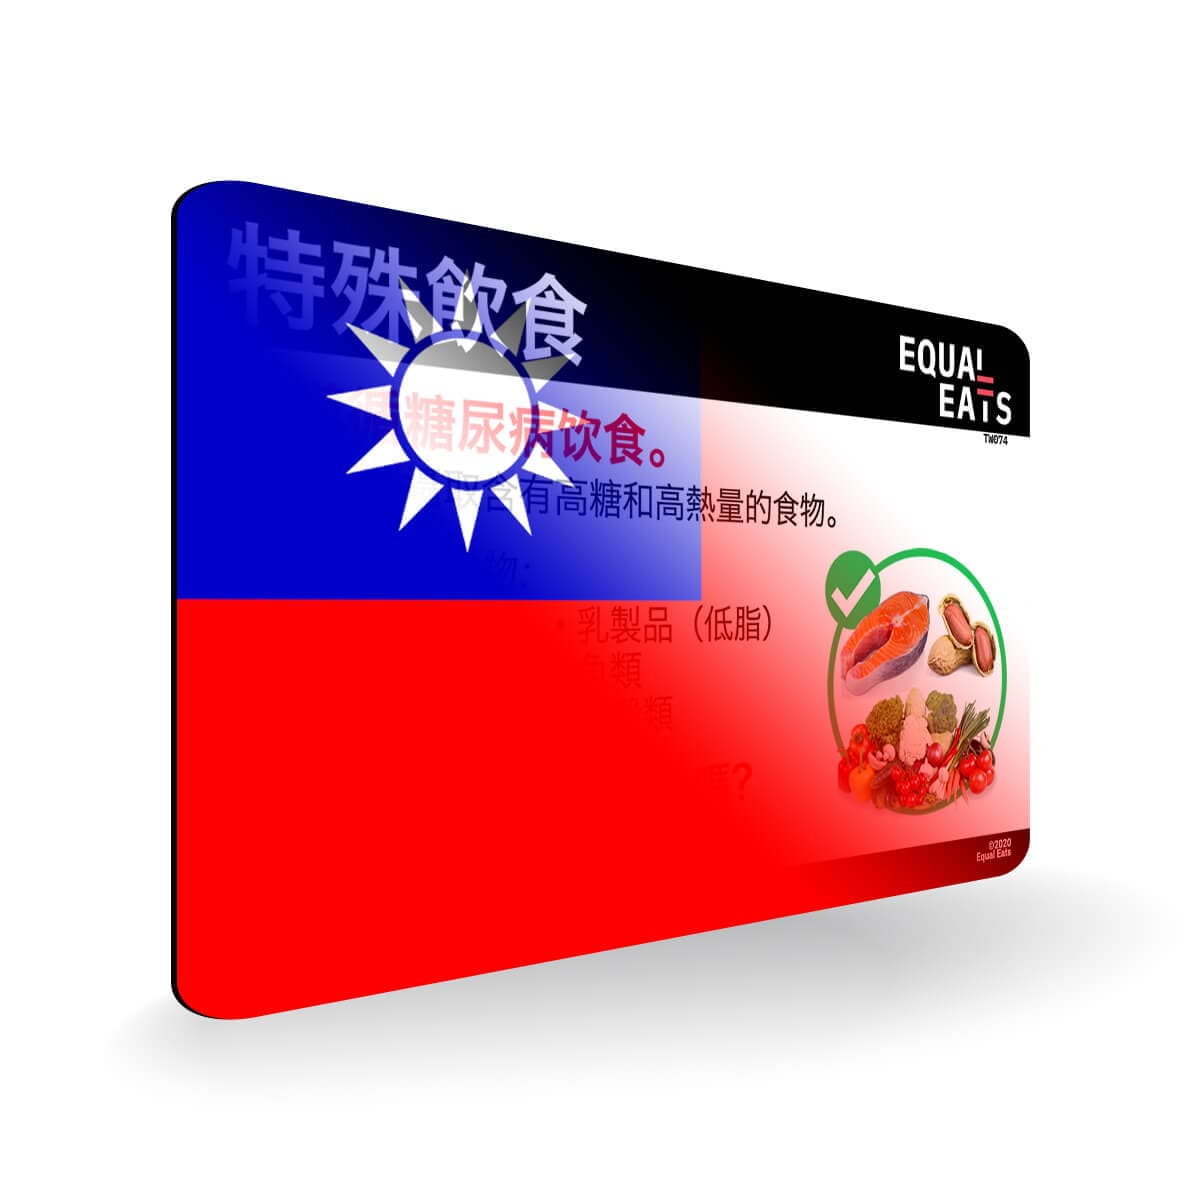 Diabetic Diet in Traditional Chinese. Diabetes Card for Taiwan Travel